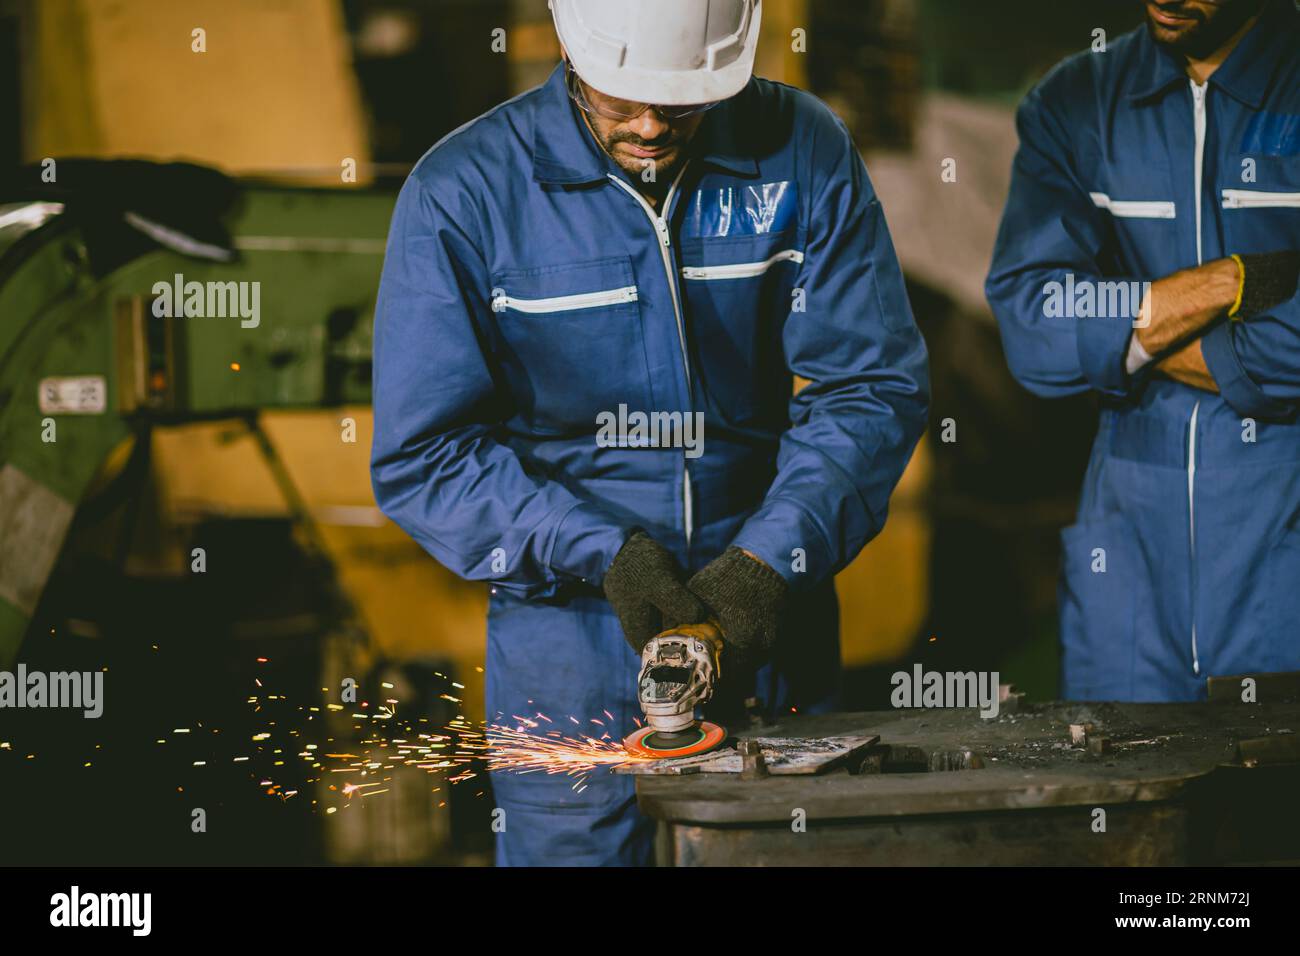 Industrial Worker Using Angle Grinder and Cutting a Metal Sheet. Contractor in Safety Uniform and Hard Hat Manufacturing Metal Structures.Heavy Indust Stock Photo